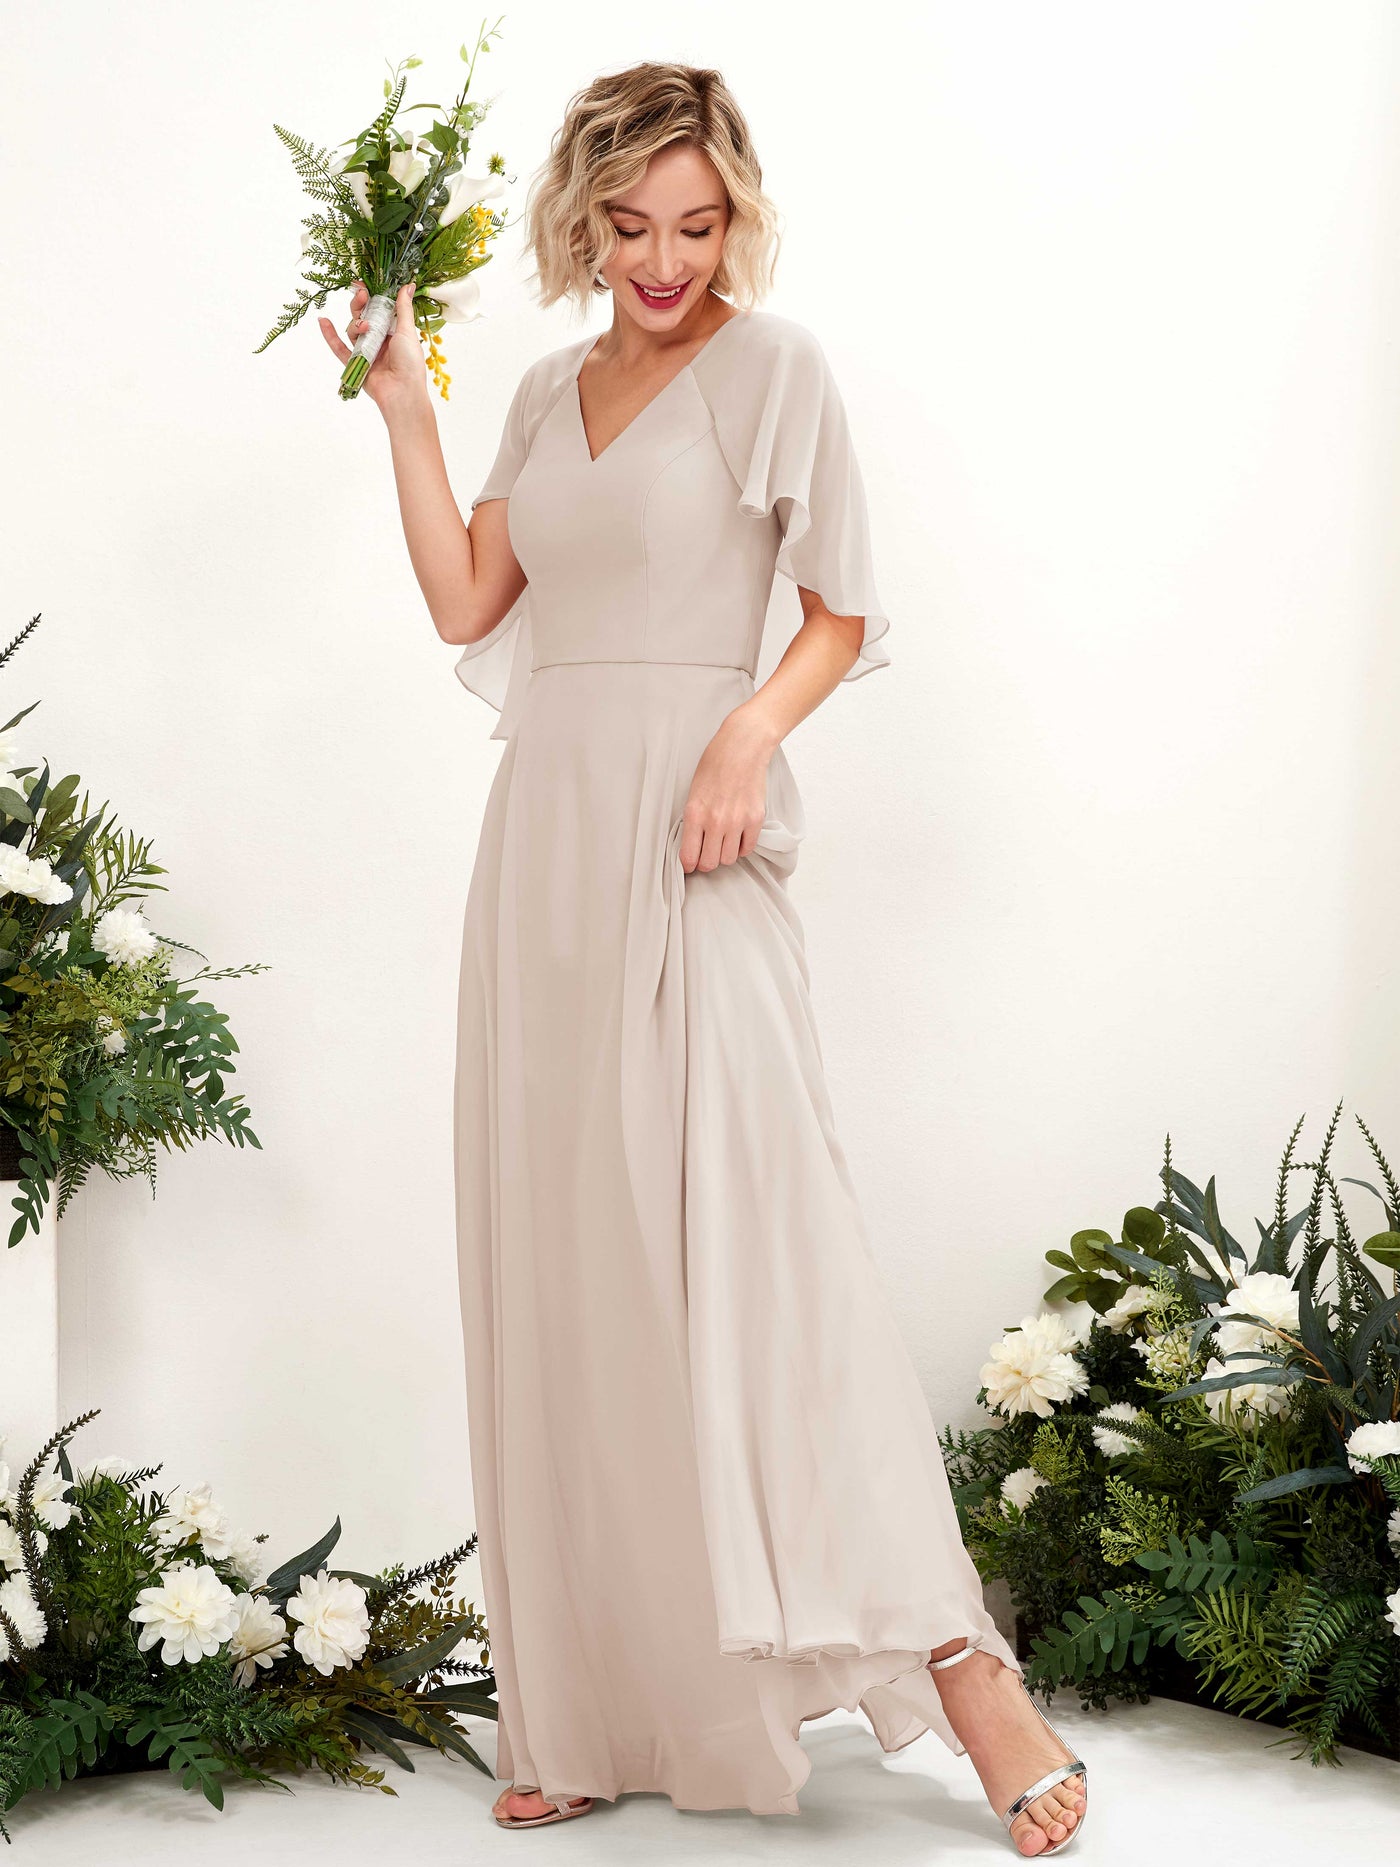 Champagne Bridesmaid Dresses Bridesmaid Dress A-line Chiffon V-neck Full Length Short Sleeves Wedding Party Dress (81224416)#color_champagne